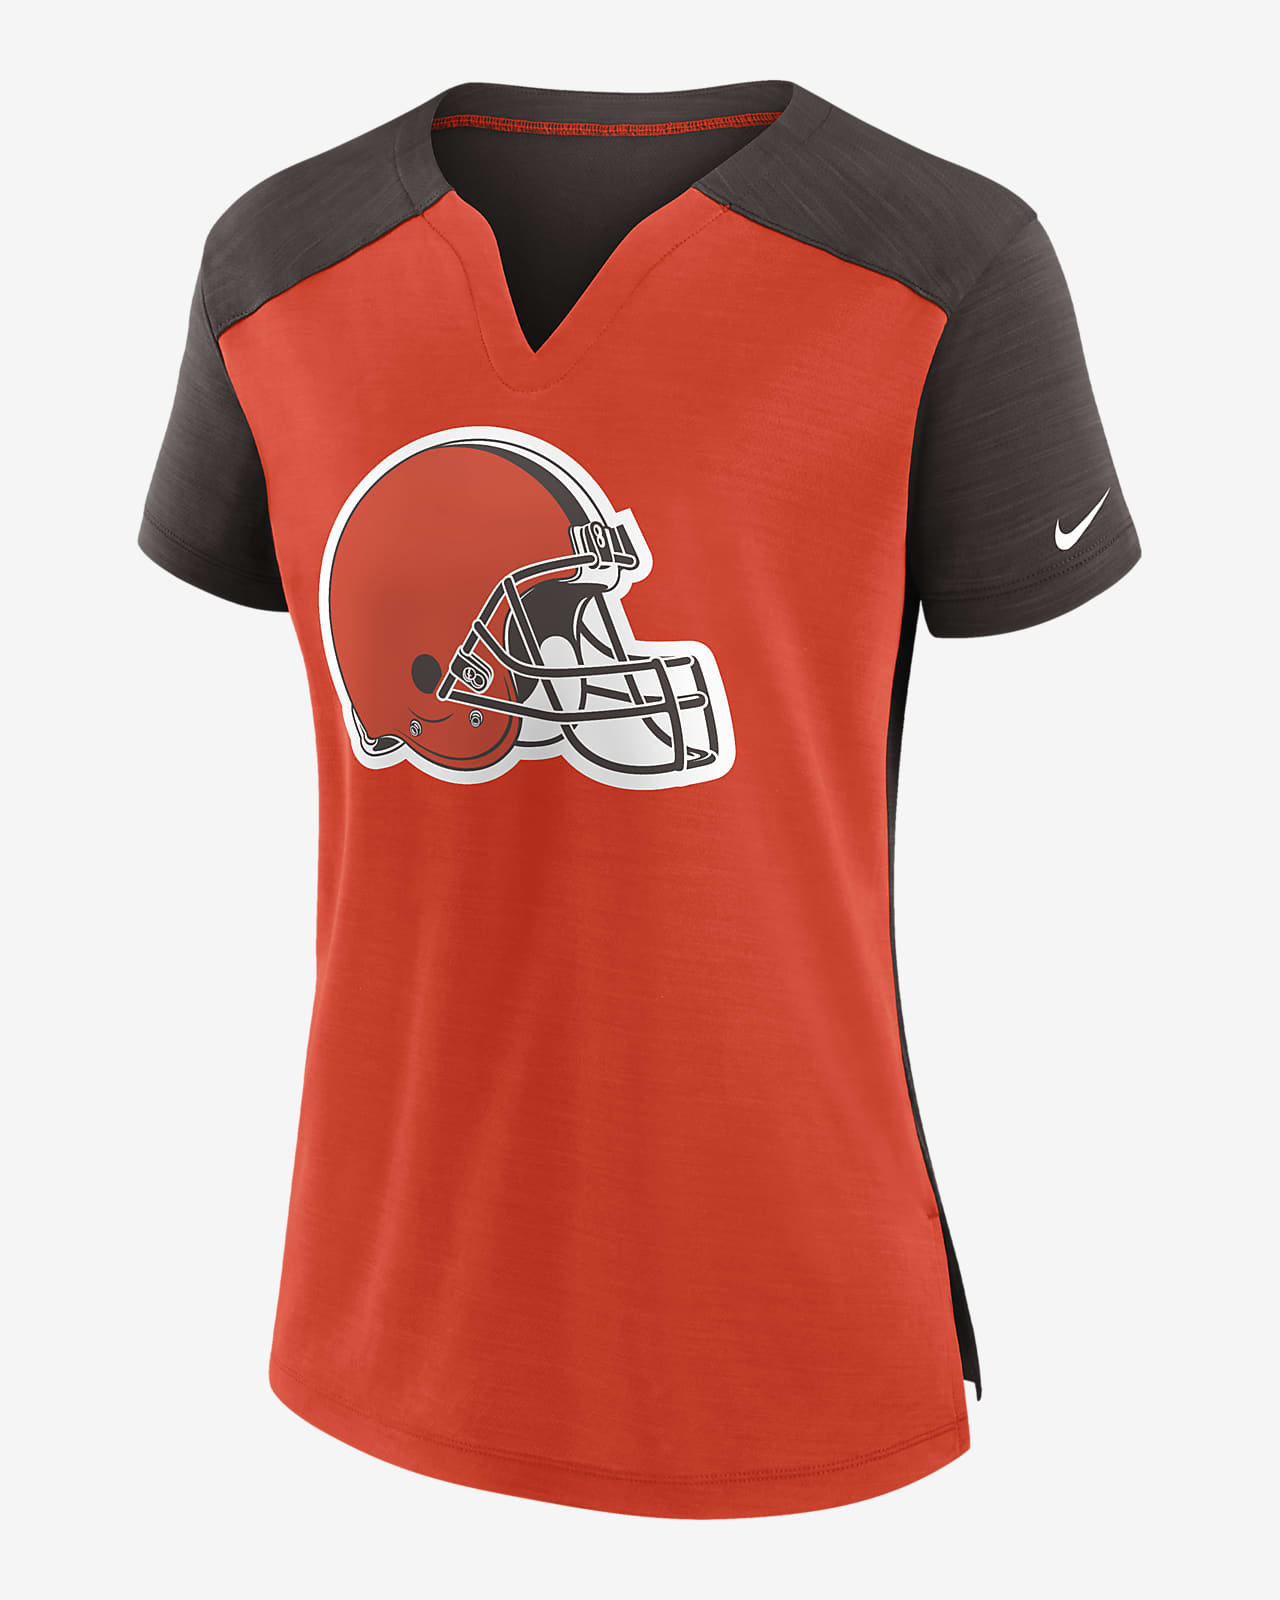 women's cleveland browns t shirts